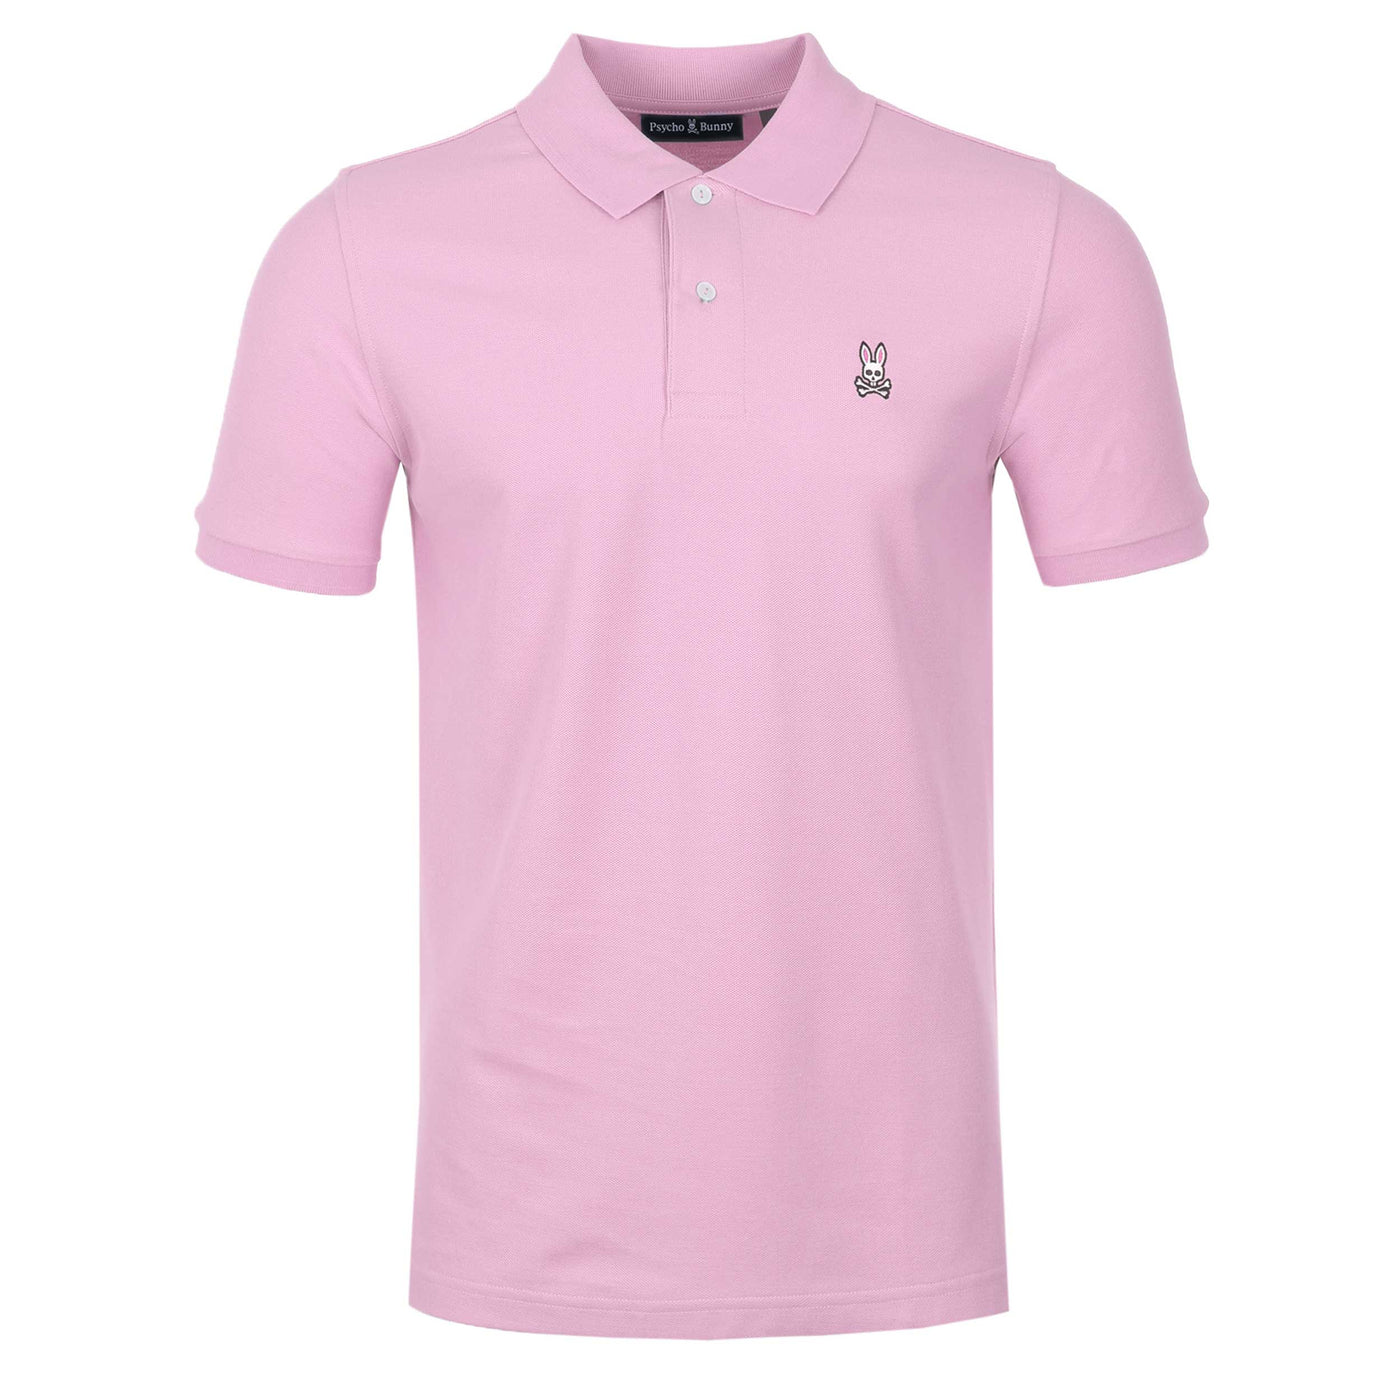 Psycho Bunny Classic Polo Shirt in Pastel Lavender Pink